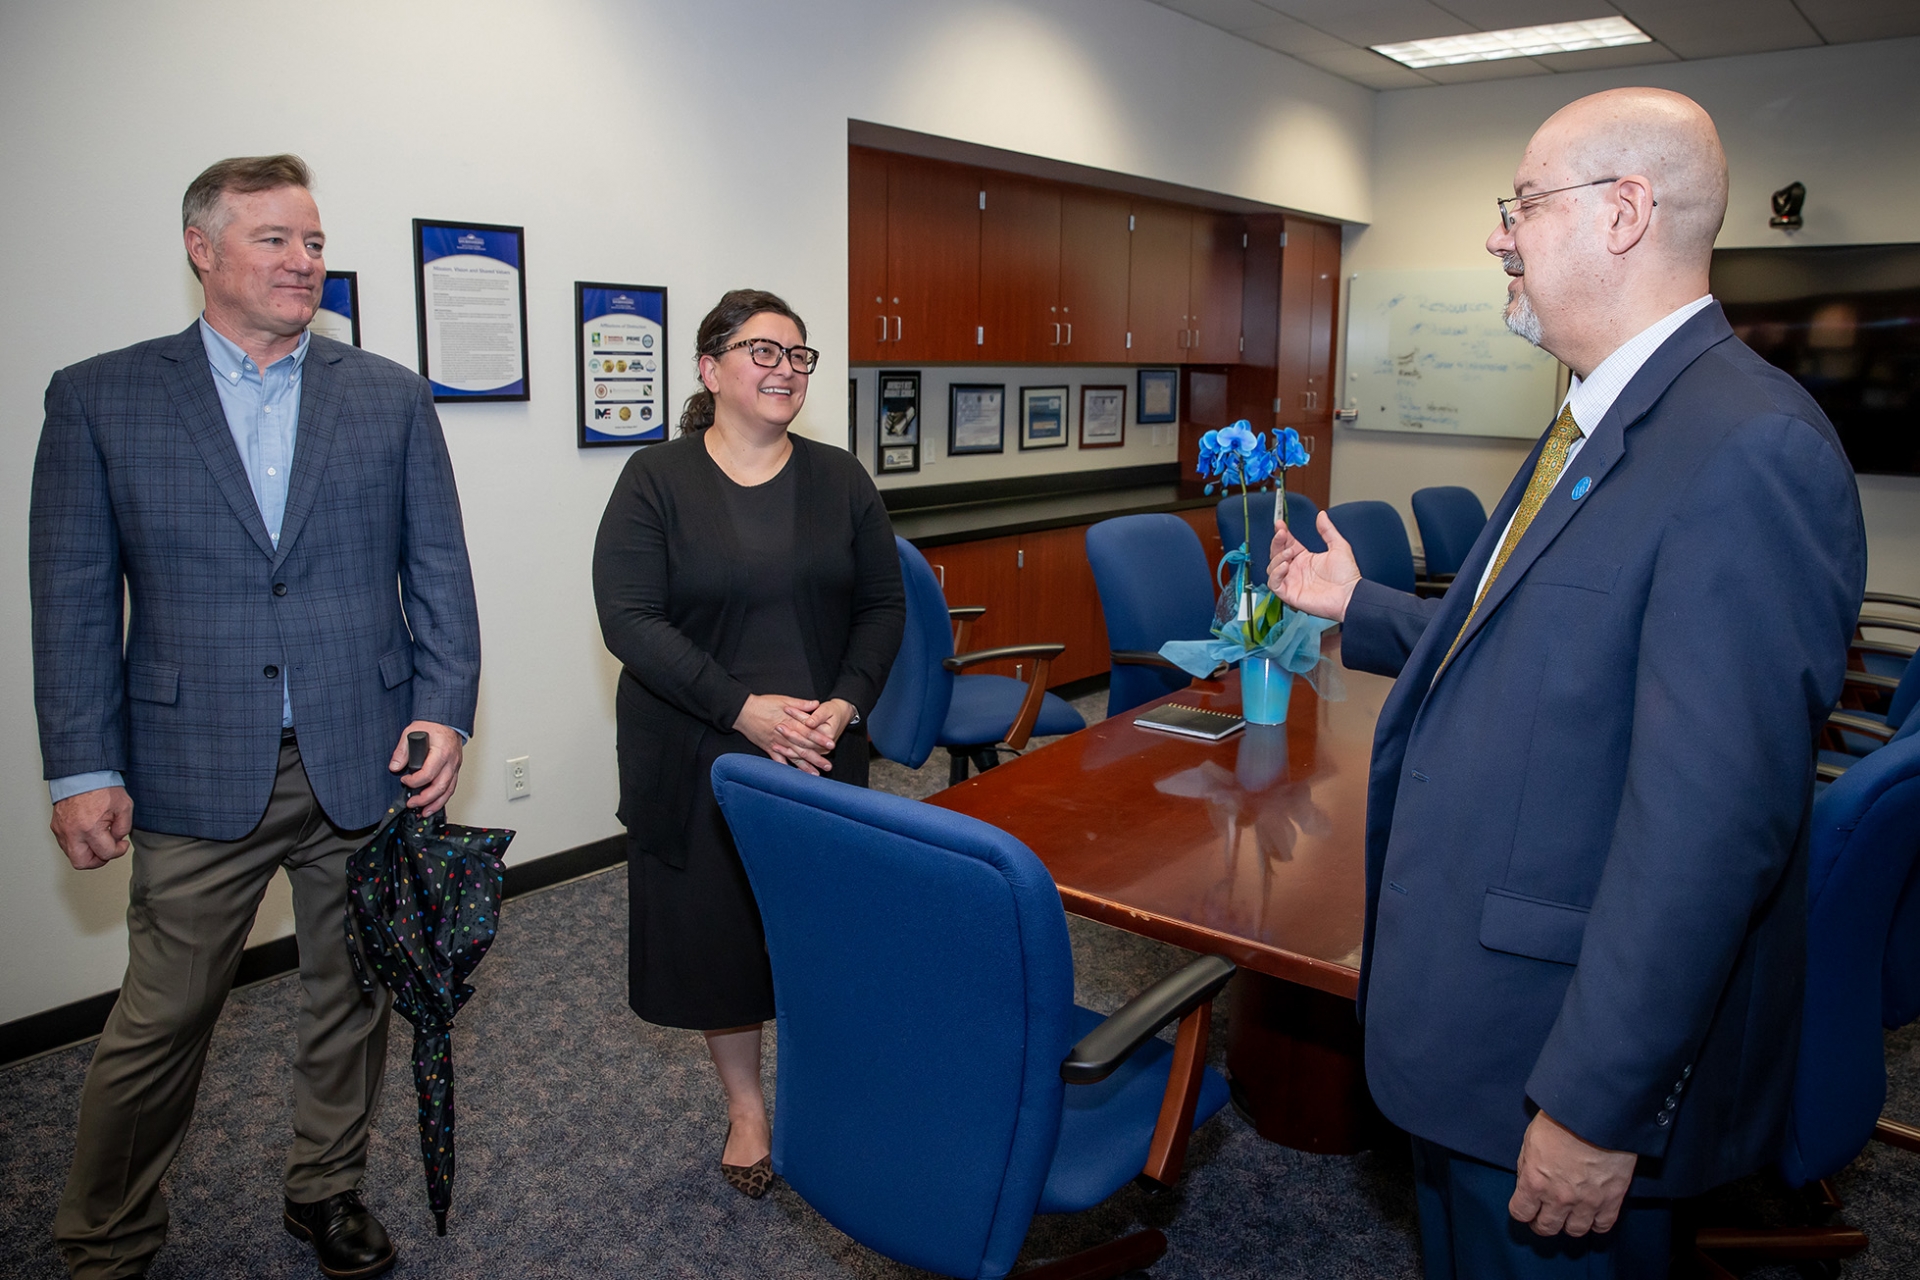 Robert Stokes (left), chair of the public administration department, left, and Tomas Gomez-Arias (right), dean of the Jack H. Brown College of Business and Public Administration, chat with Sharon Velarde Pierce, associate professor of public administration and the recipient of the 2022-23 Outstanding Faculty Advisor Award.>>